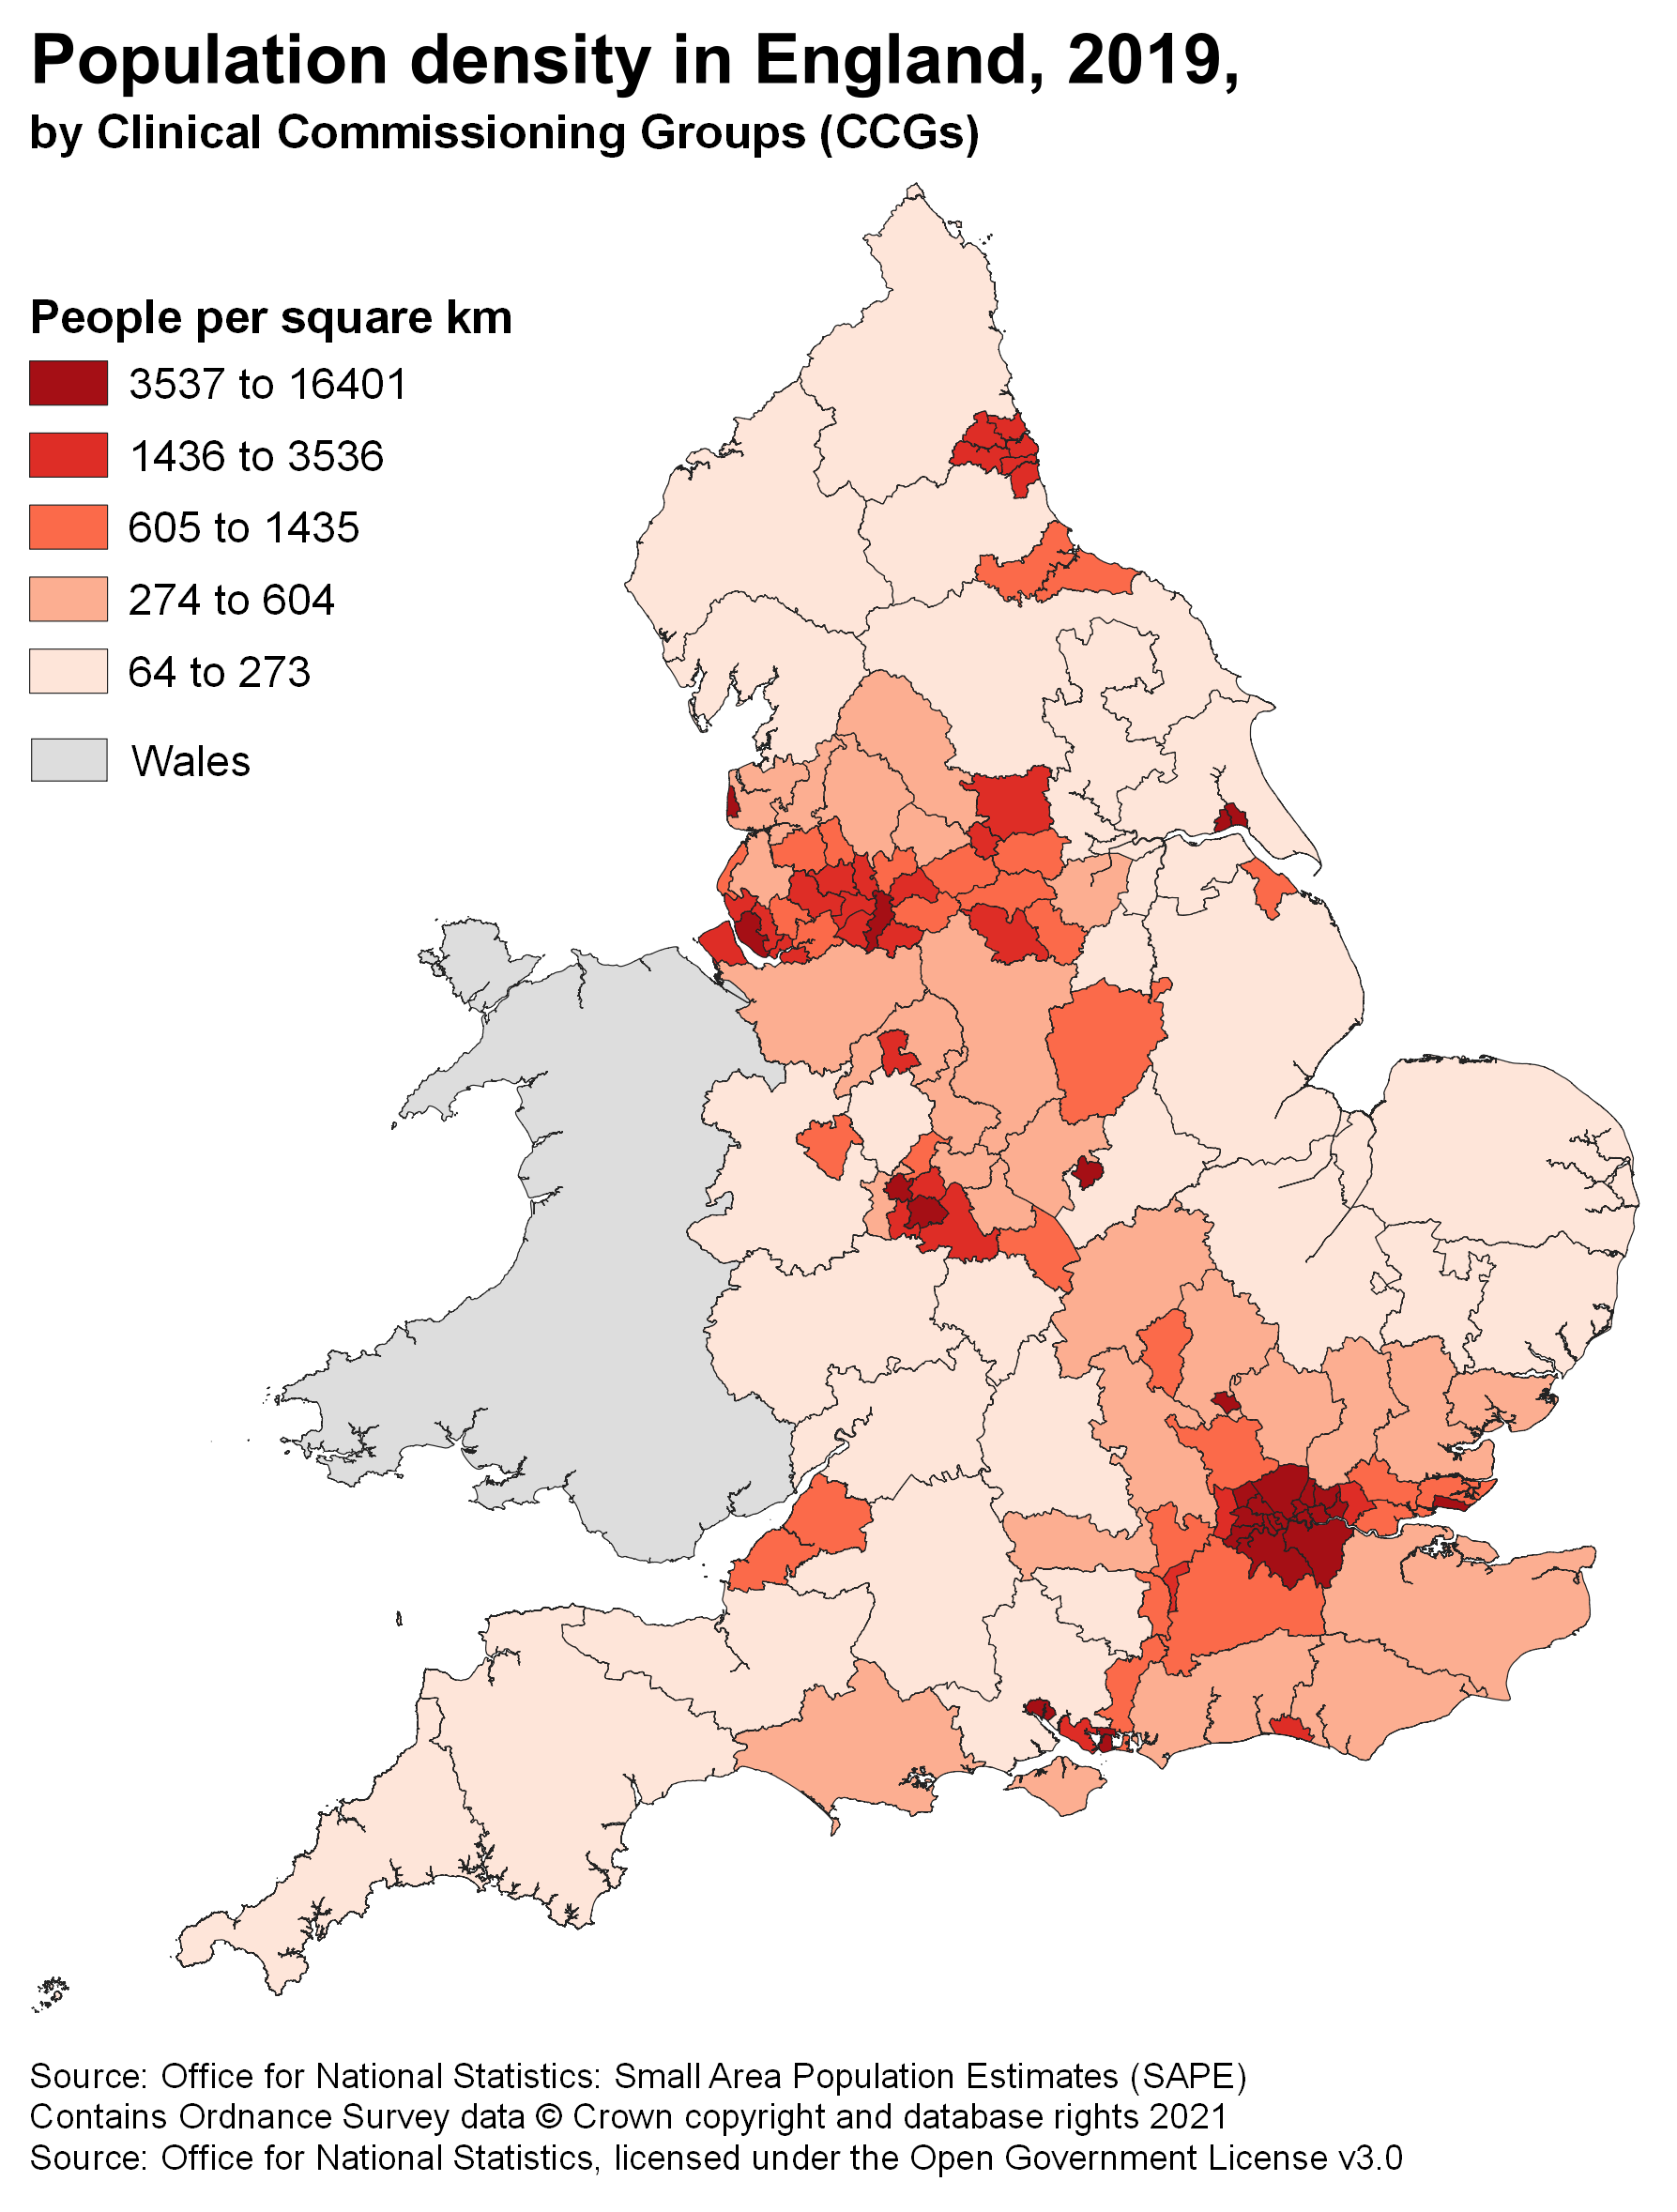 A good version of a map showing population density by CCGs, England.